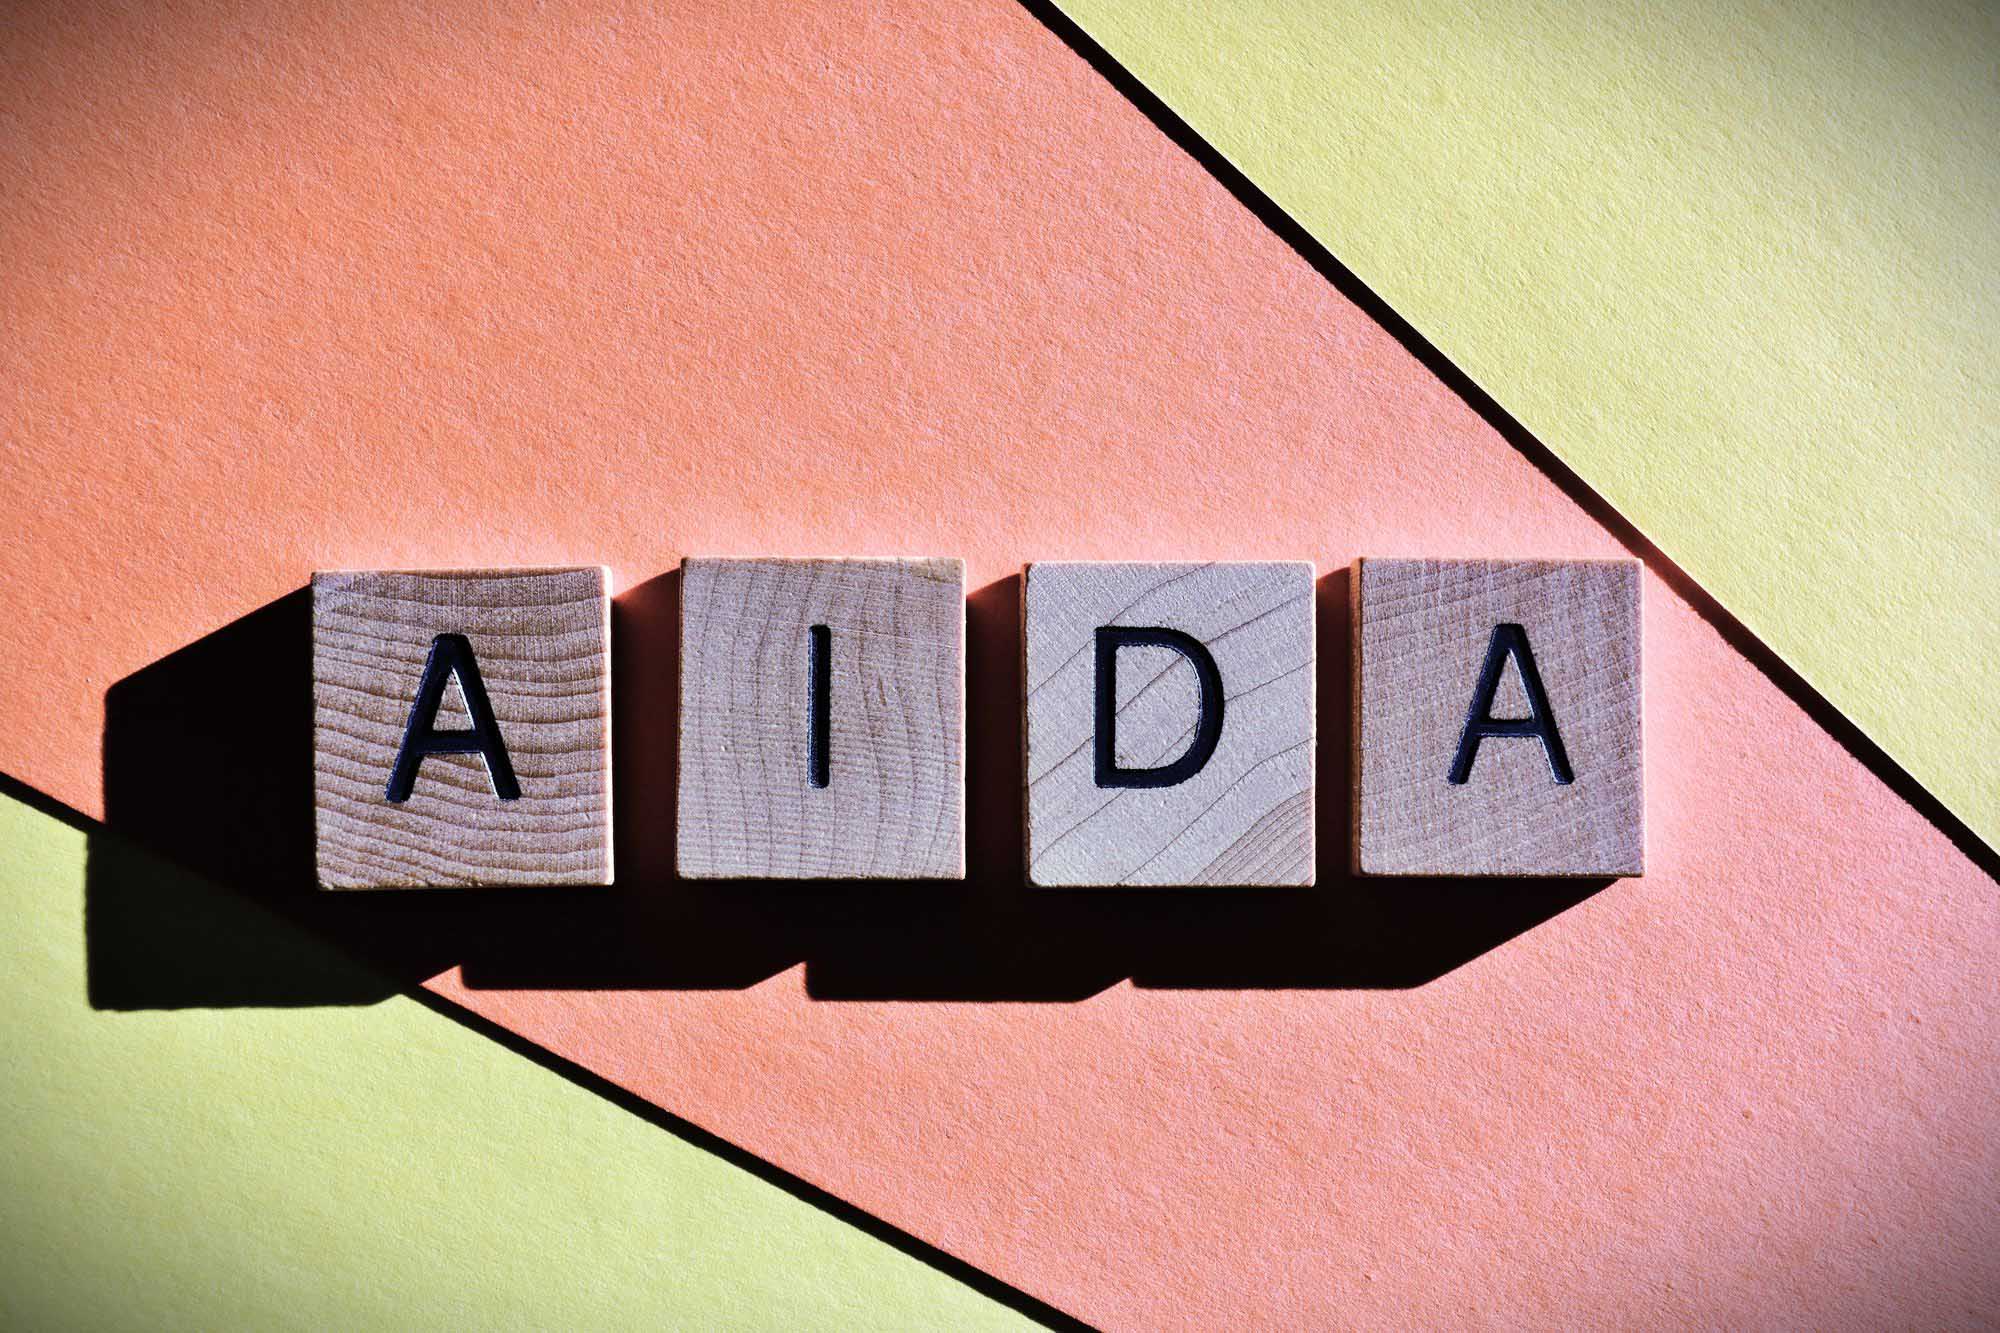 Building An Effective Email Campaign Using The AIDA Framework